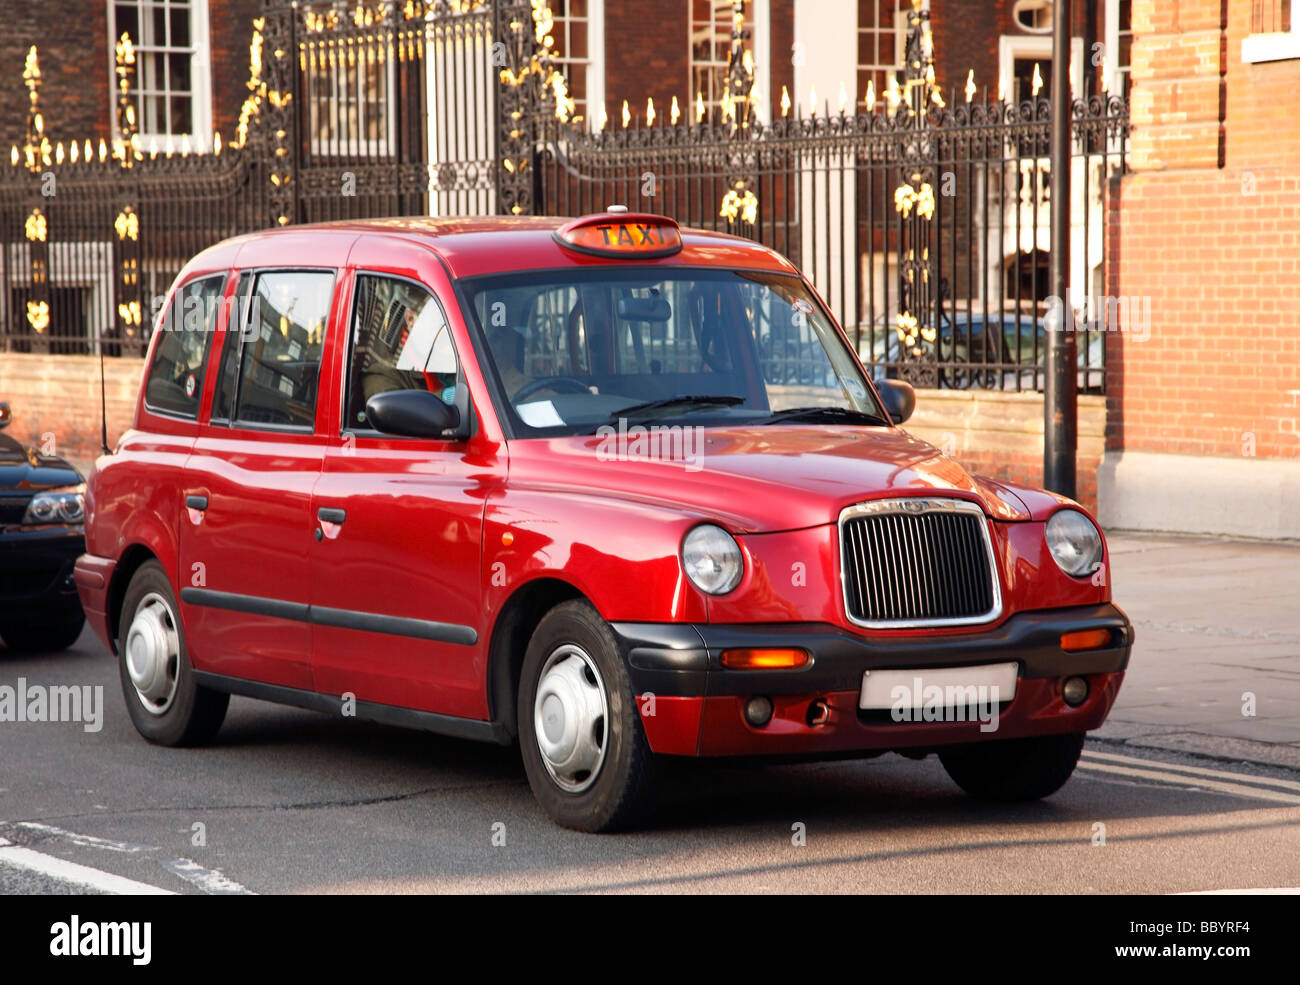 Red cab in London Stock Photo